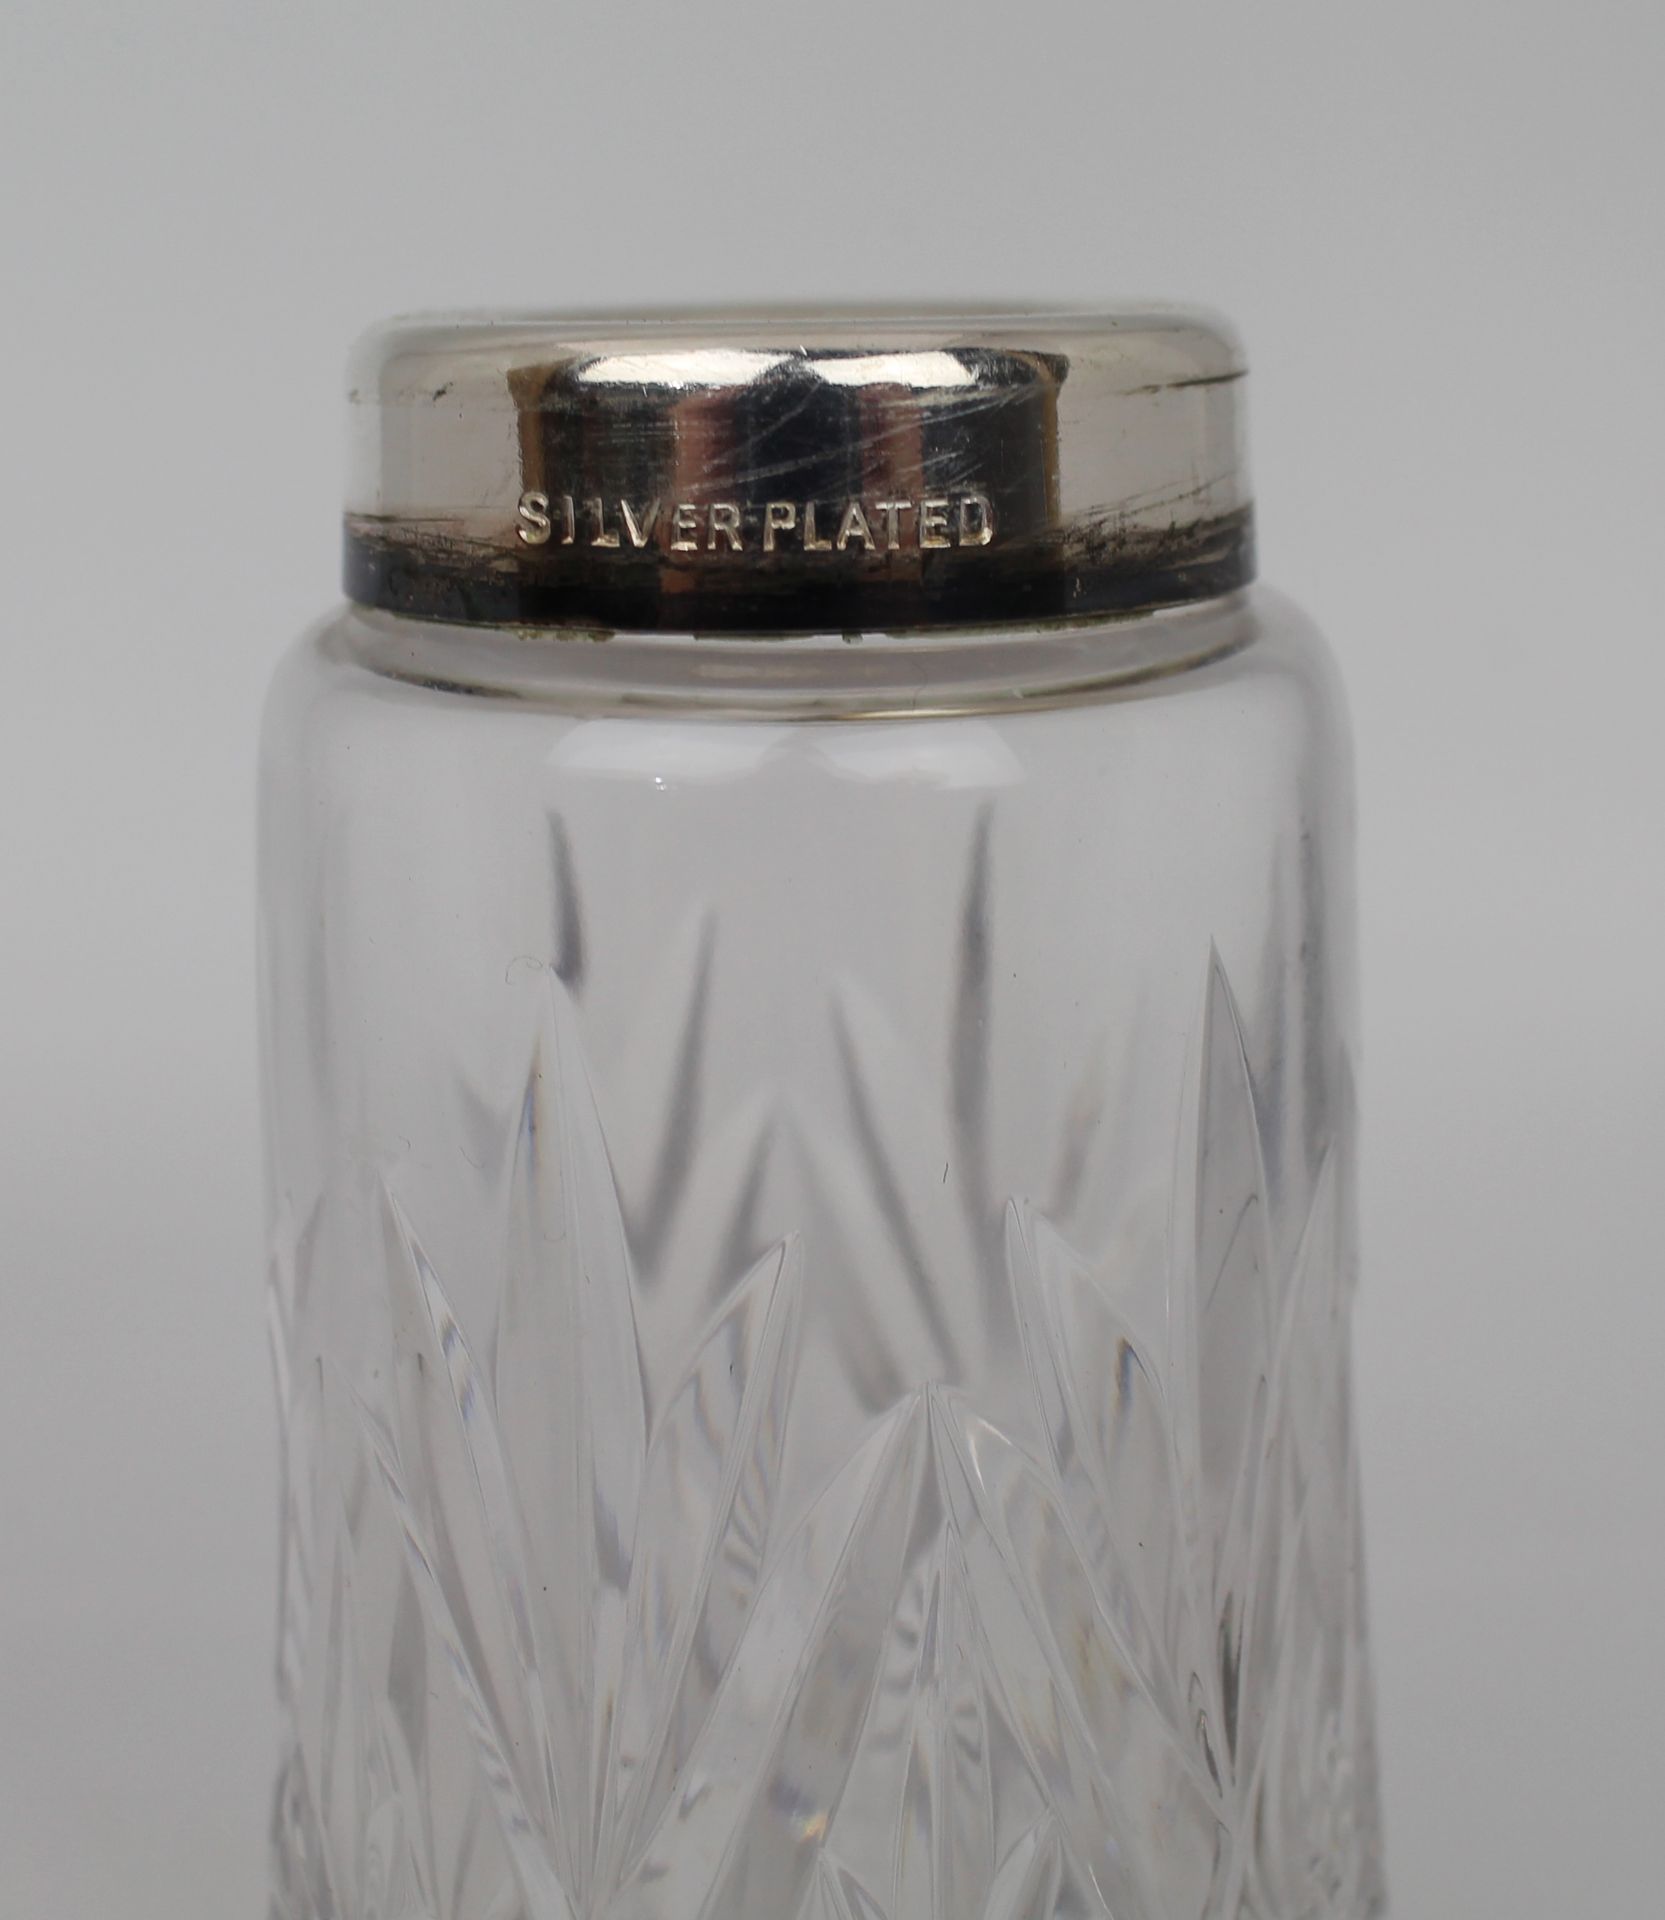 Vintage Cut Glass & Silver Plated Sugar Caster - Image 2 of 3